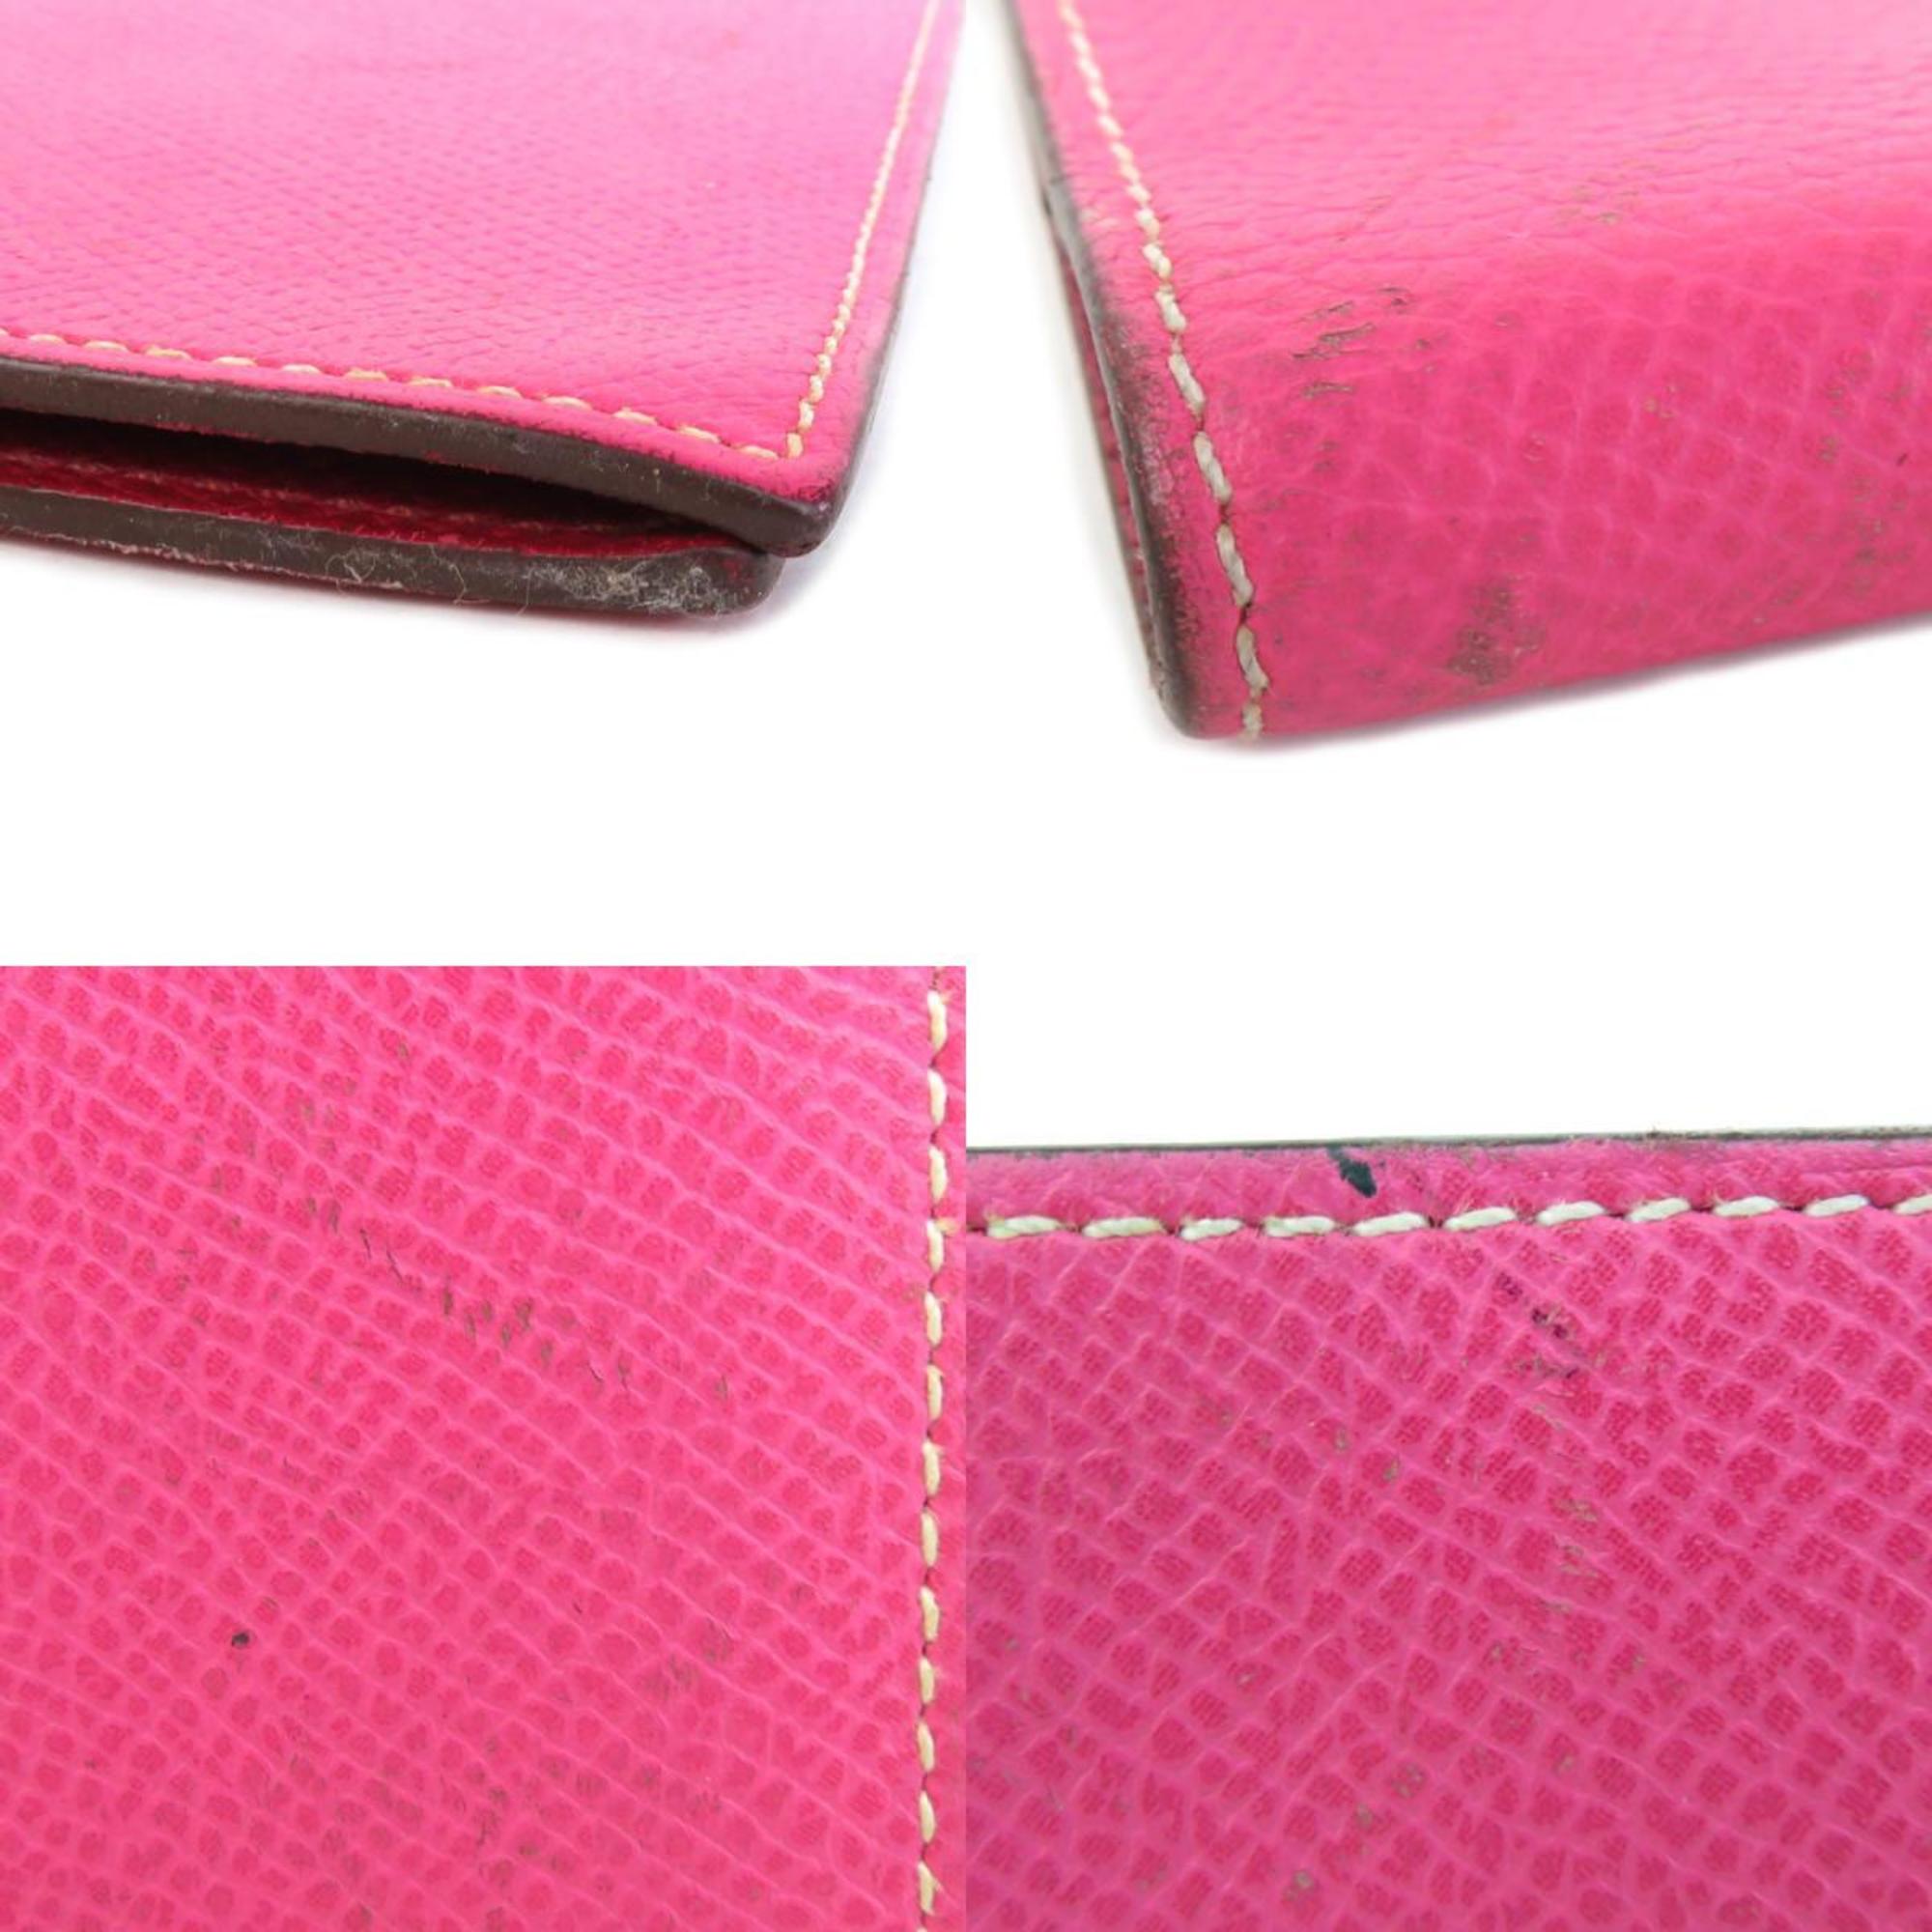 Hermes Notebook Cover Leather Pink/Bordeaux Ladies